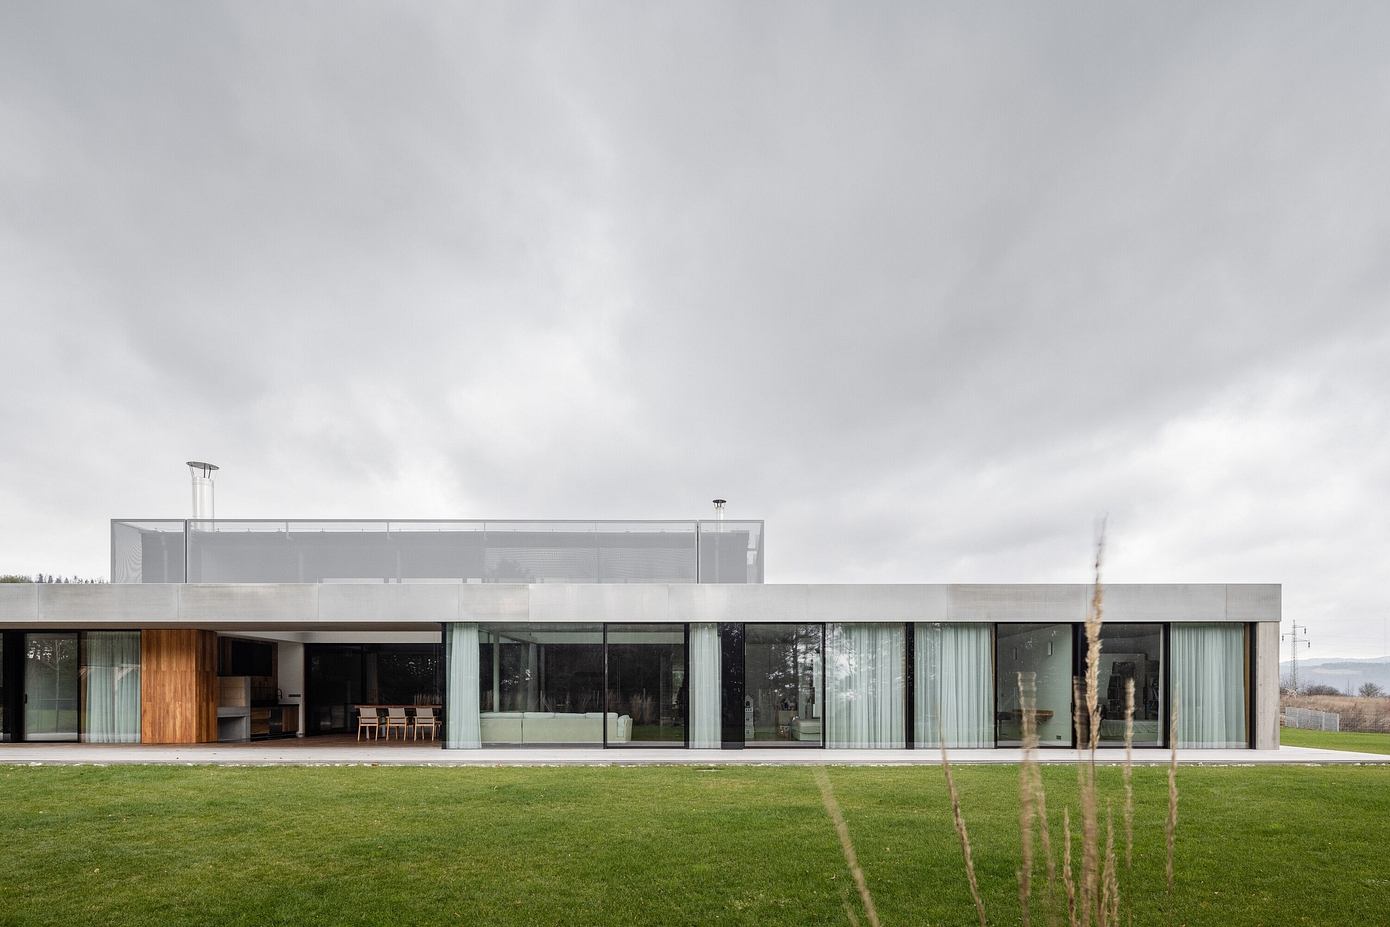 Embedded House: Organic Blending of Nature and Architecture